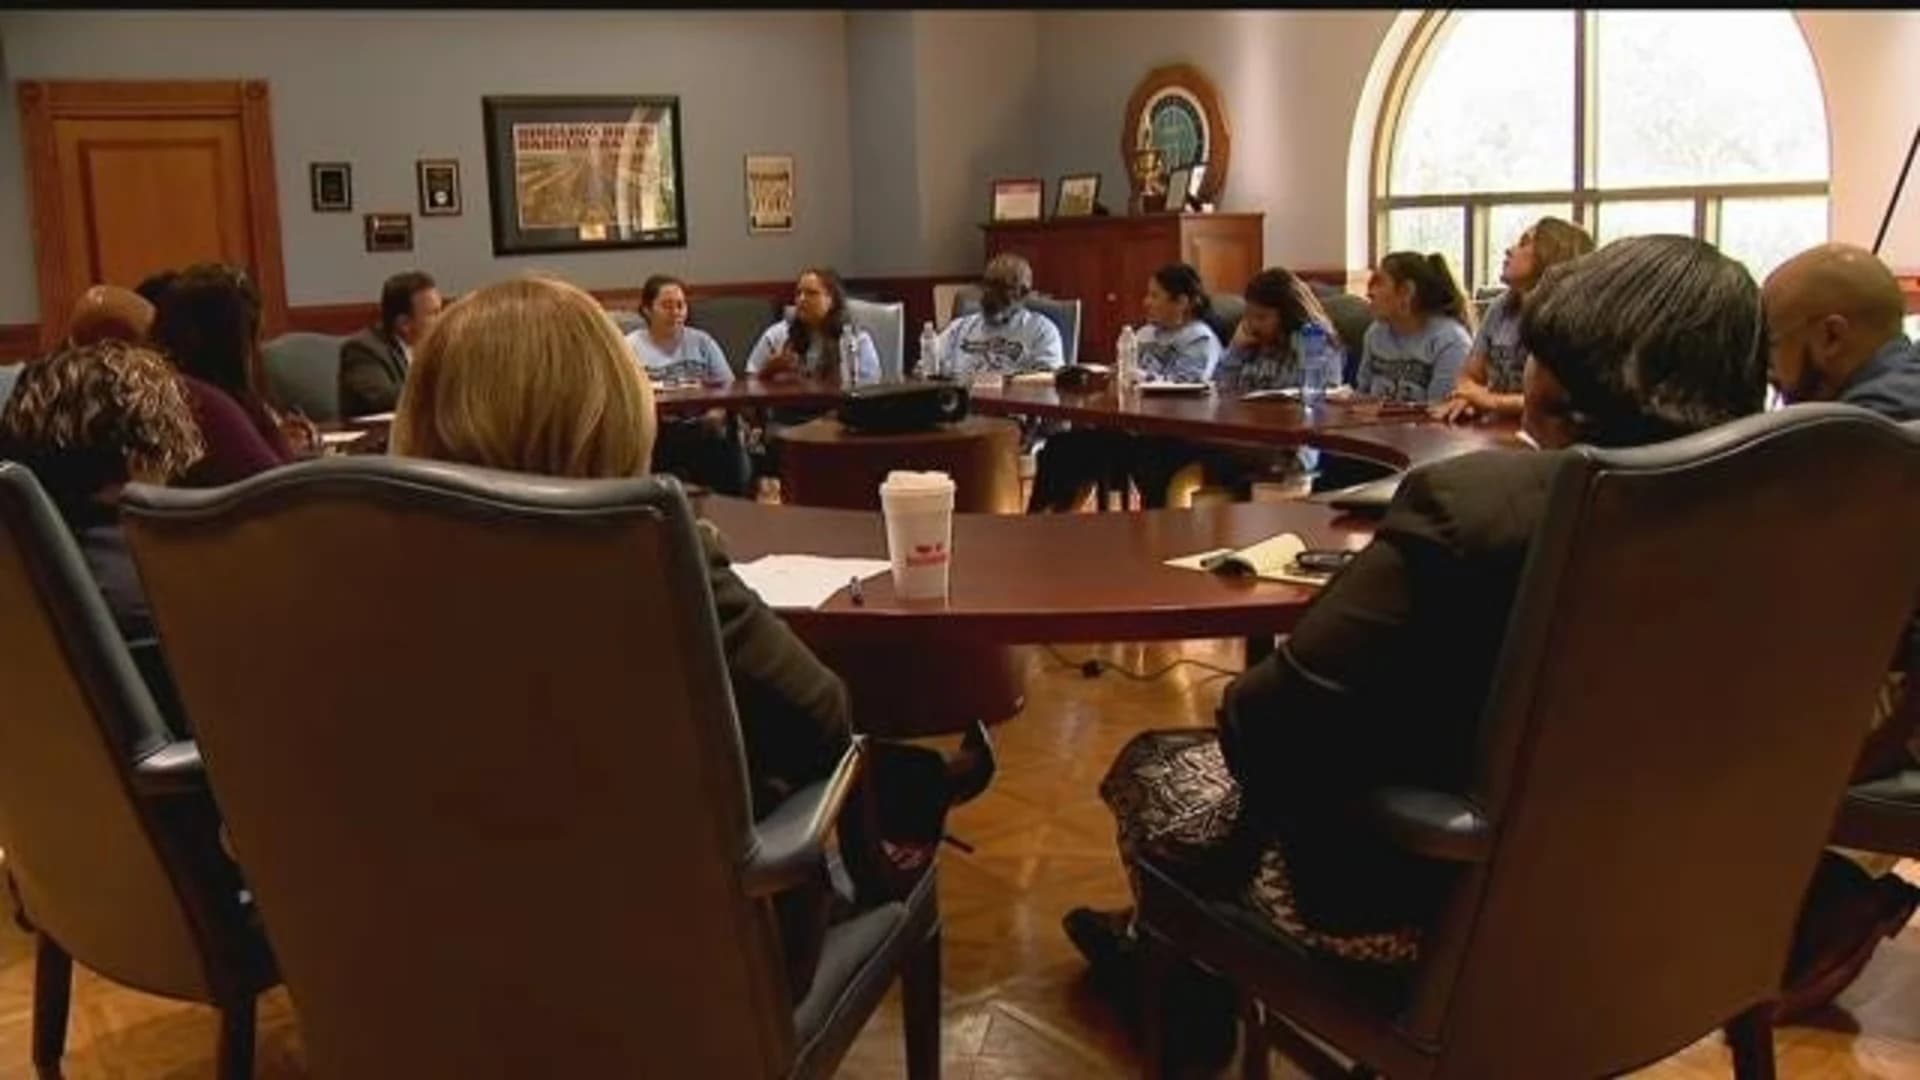 Immigration advocacy group meets with Bridgeport mayor ahead of 'Trust Act' changes